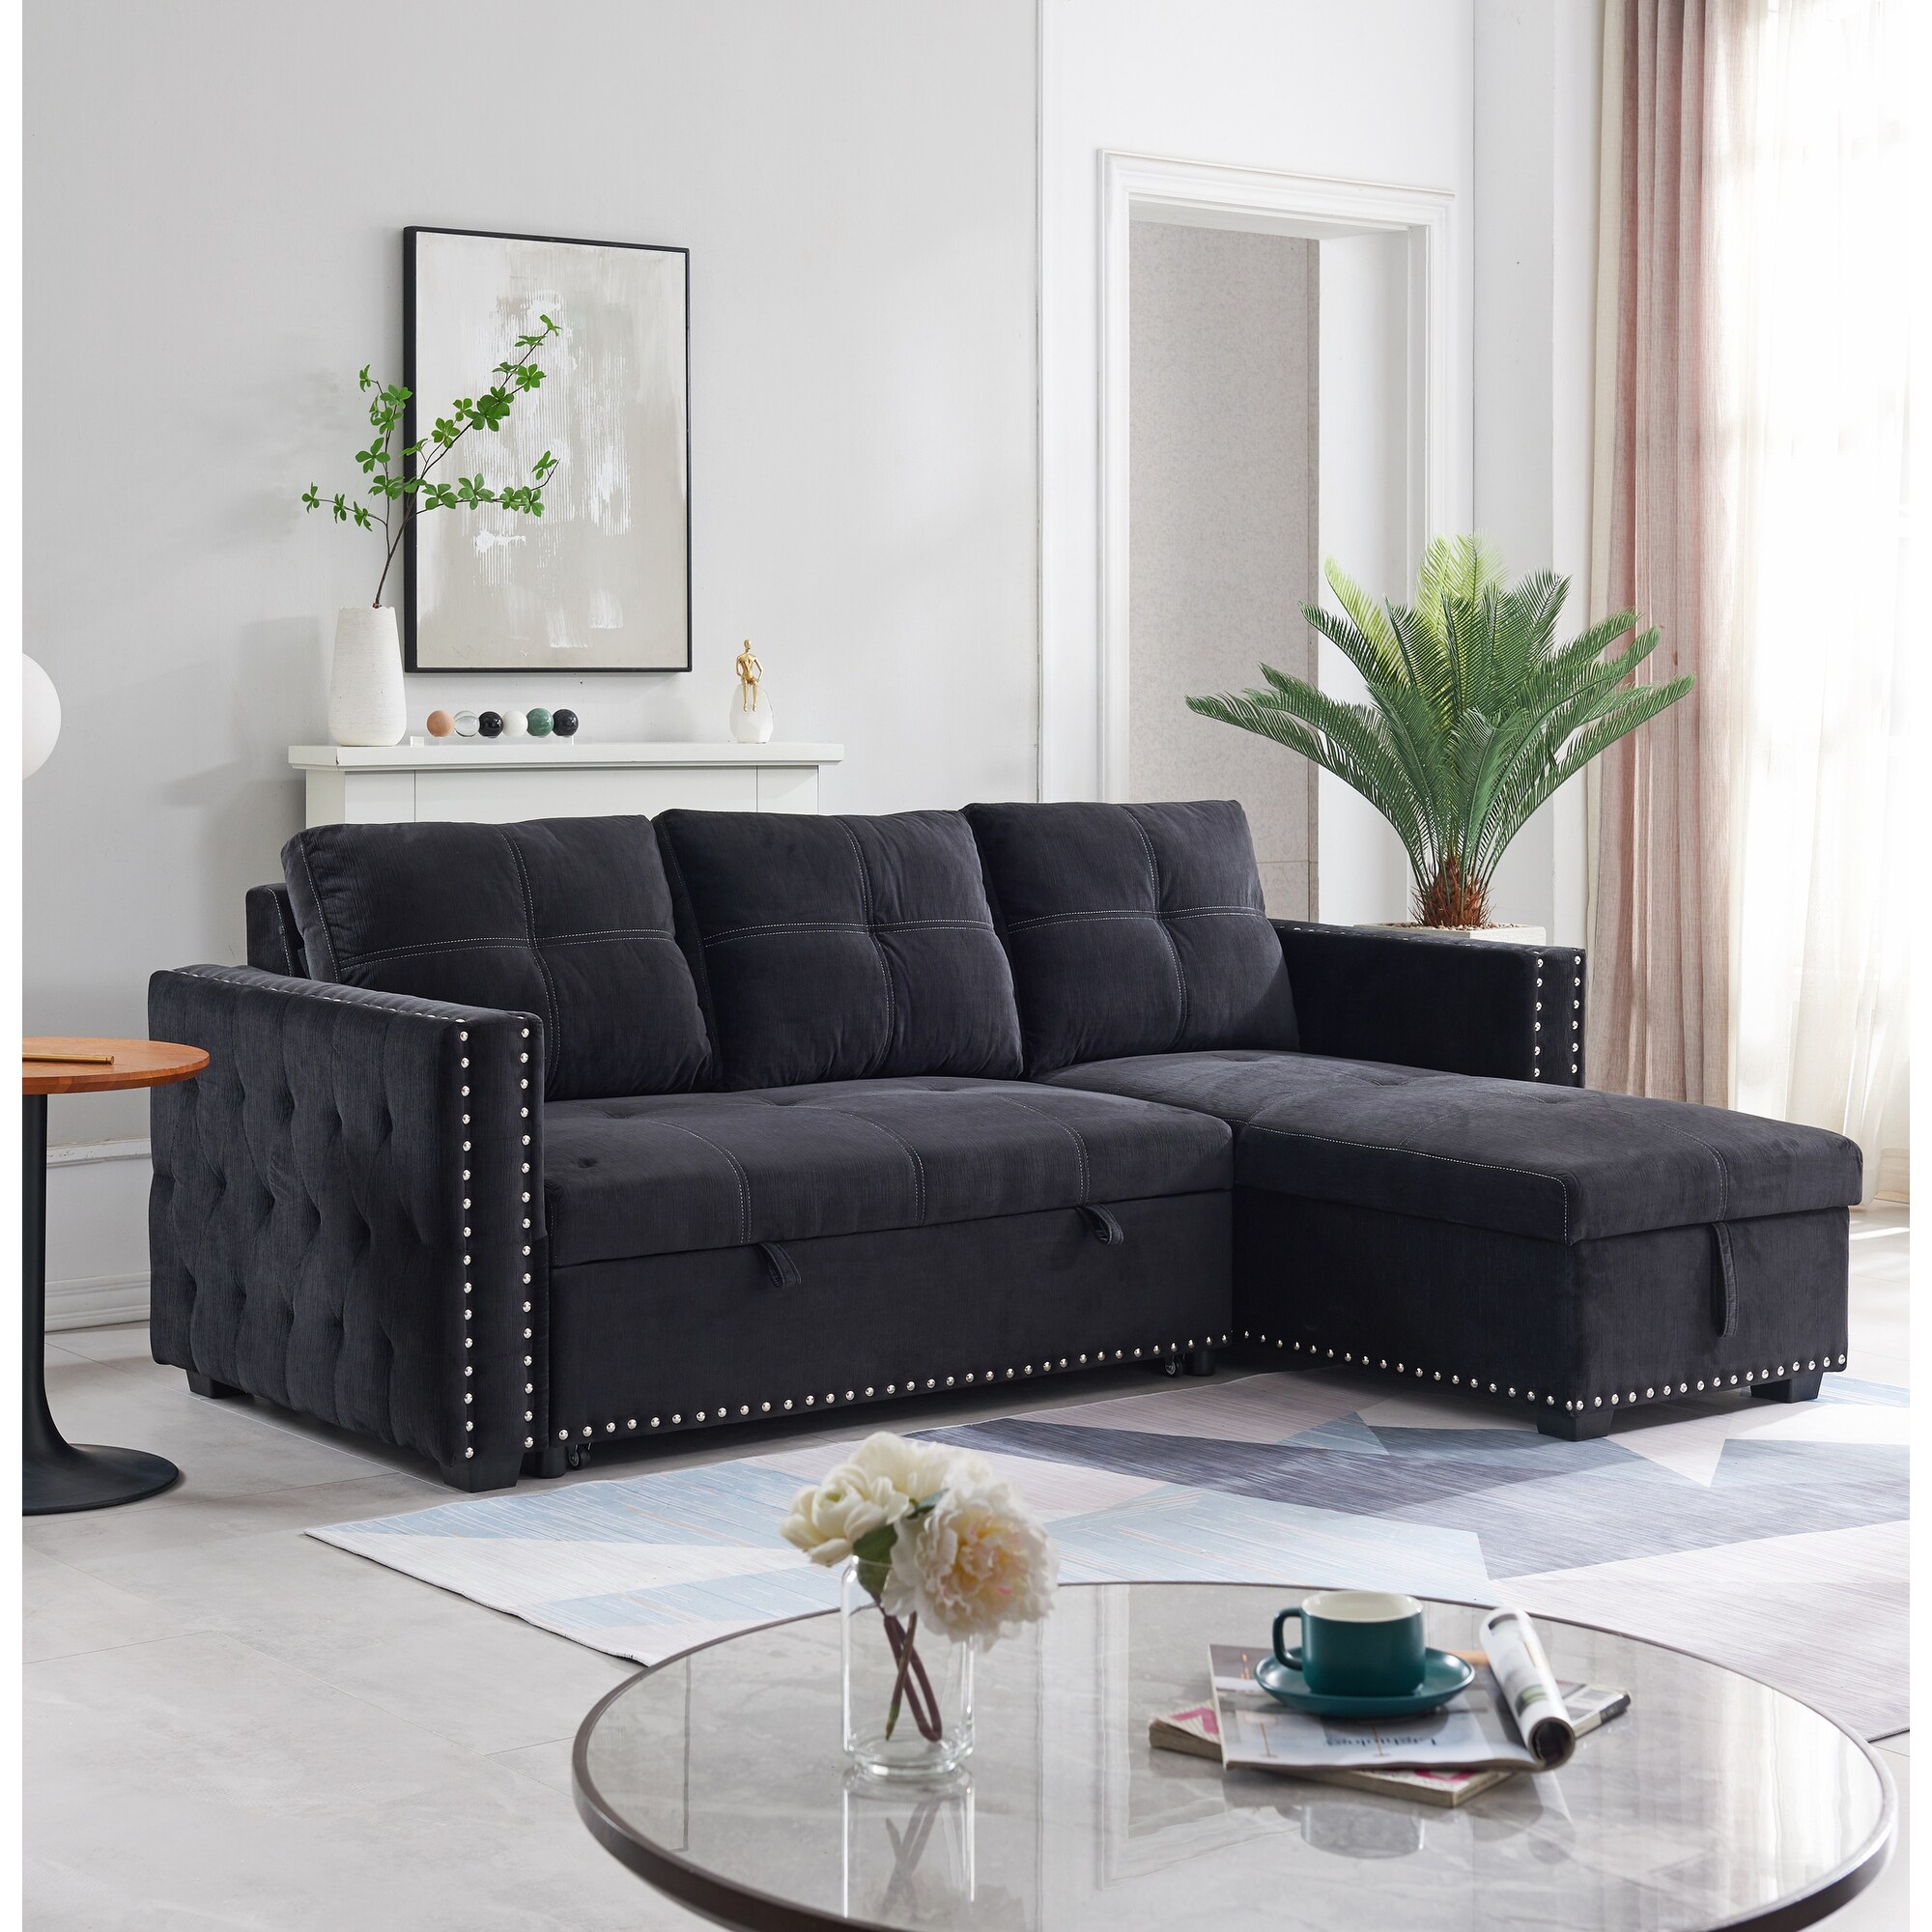 90.5" Wide Sectional Sofa Bed with Storage Chaise - Black